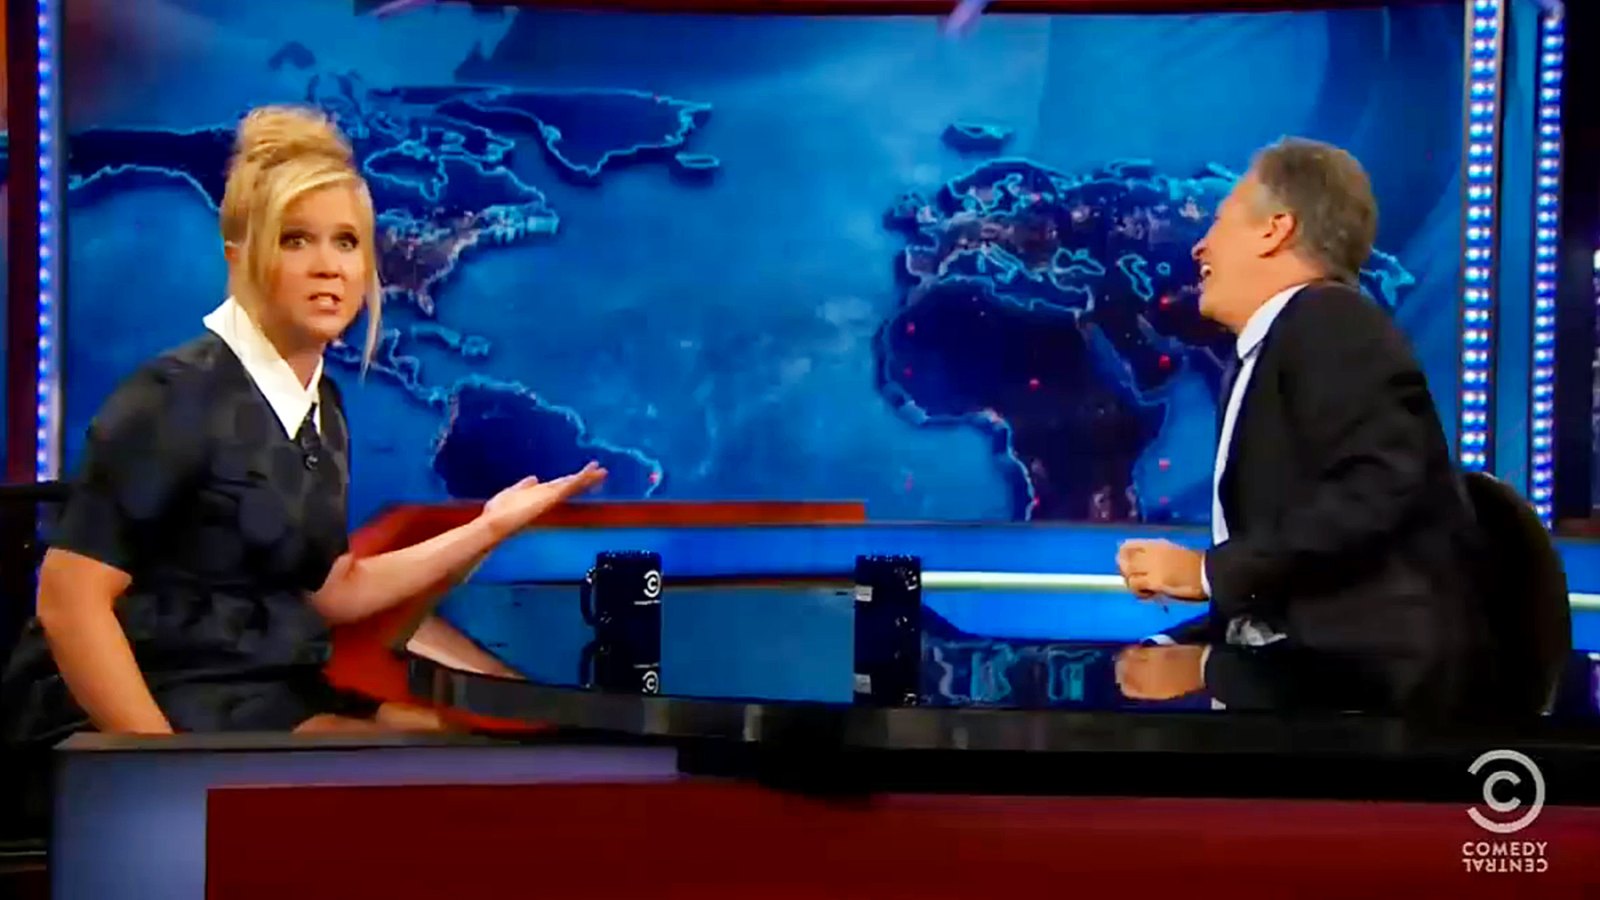 Amy Schumer on The Daily Show With Jon Stewart